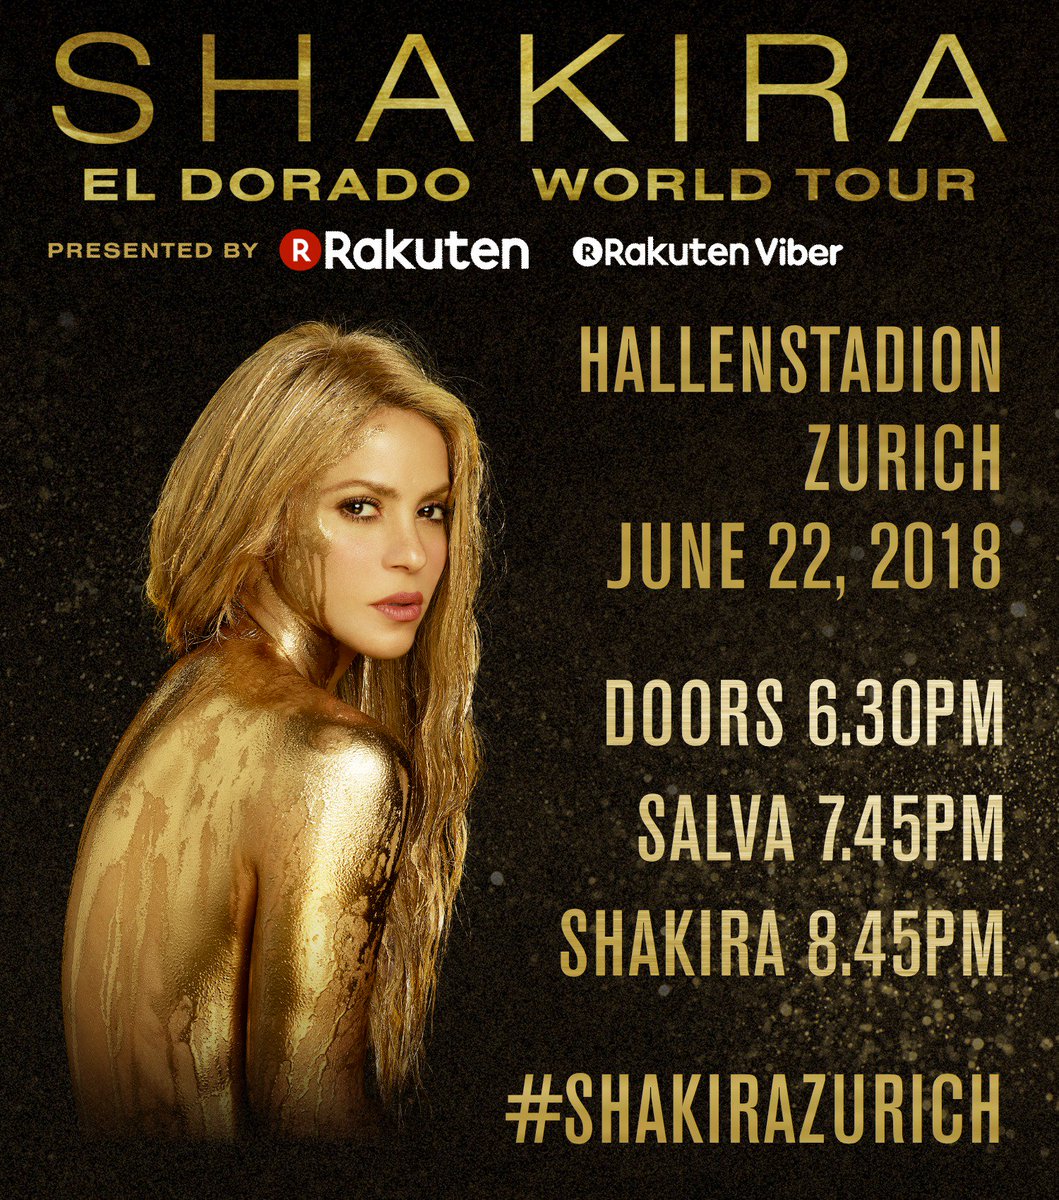 Hello????????! Here are the times for tonight's sold out #ShakiraZurich show! ShakHQ https://t.co/IAnBLlqRdP